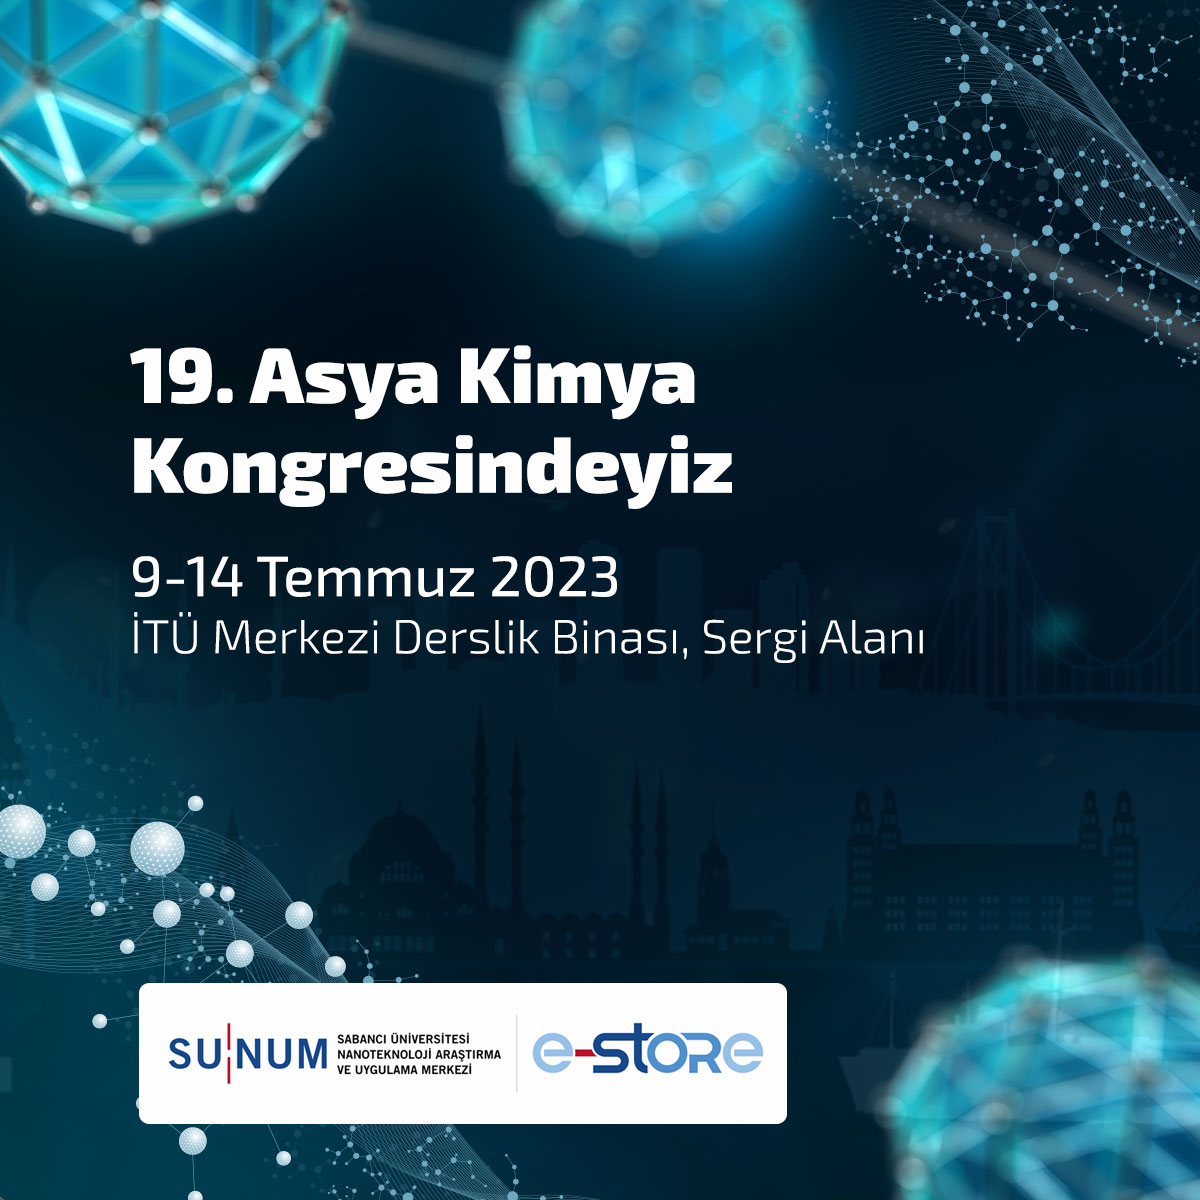 SUNUM will attend 19th Asian Chemical Congress on July 9-14, 2023